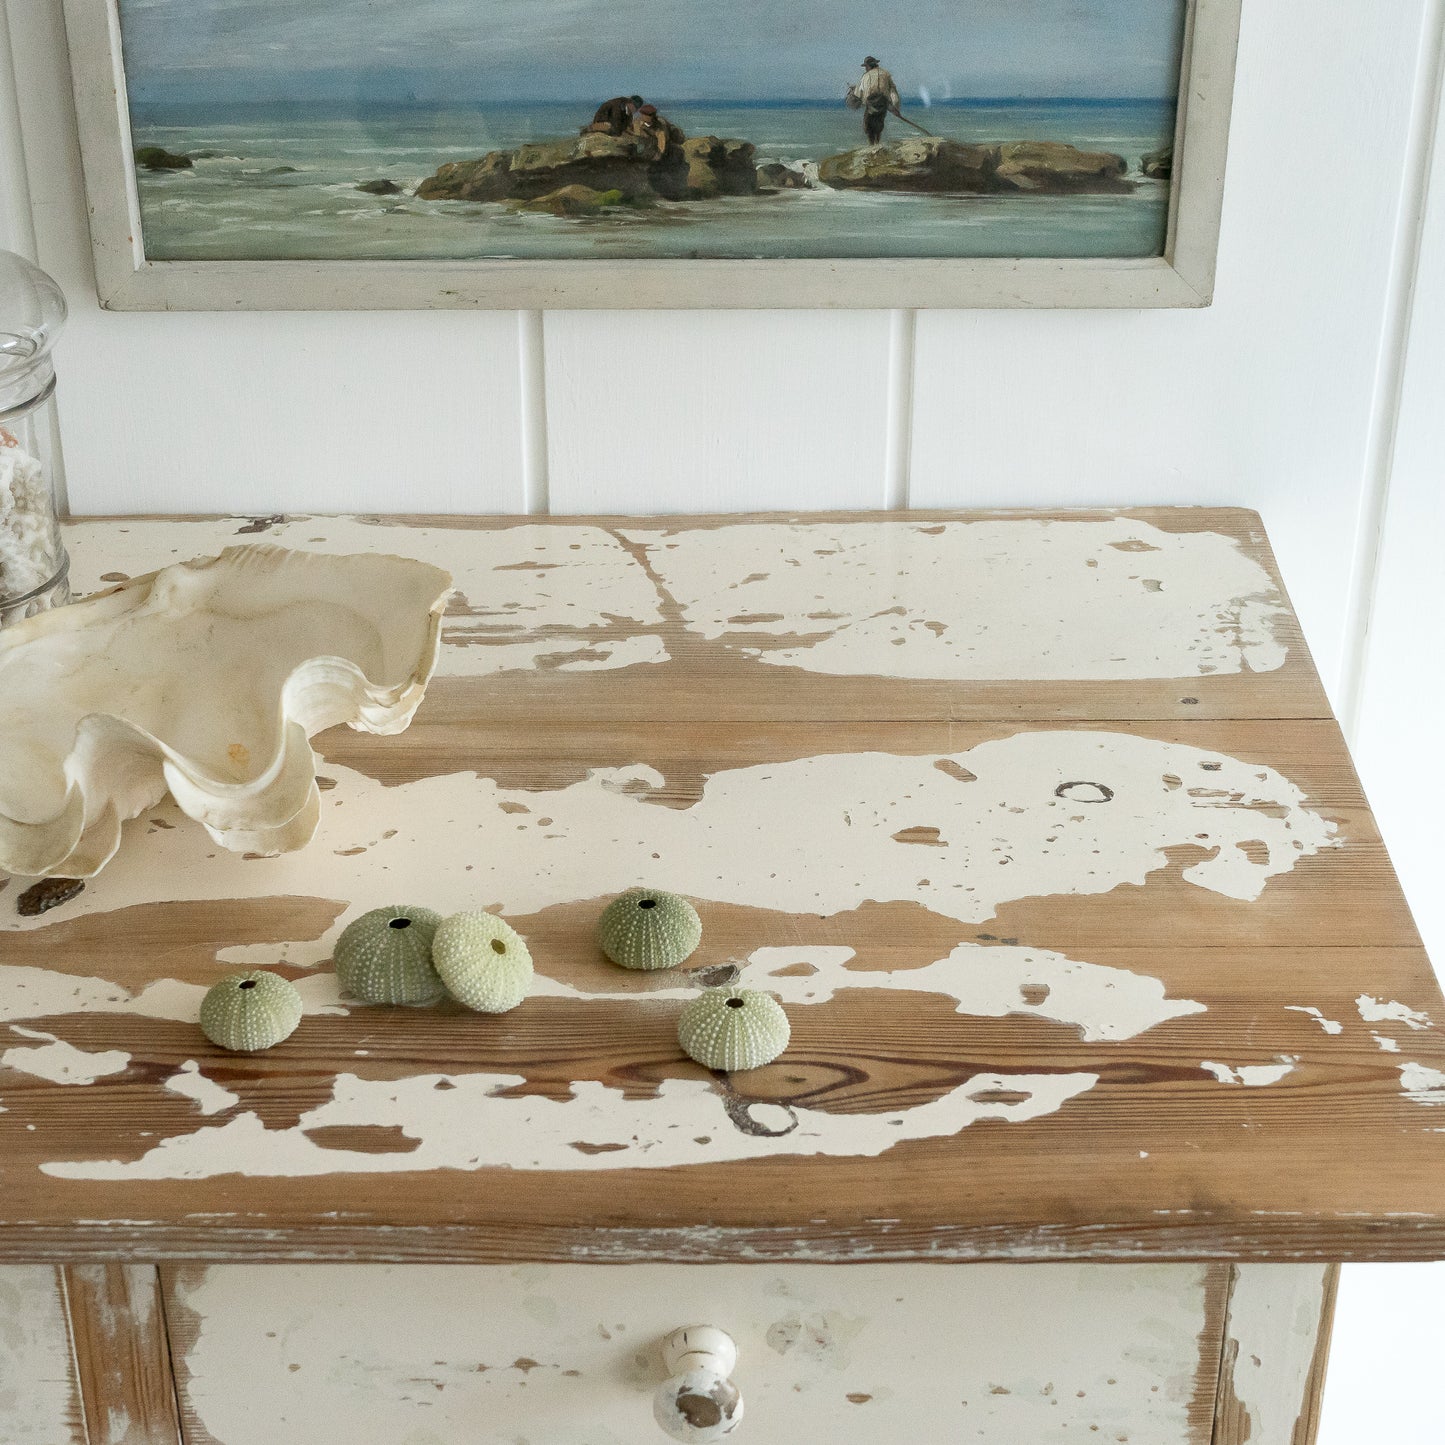 Rustic Original Painted Chest of Drawers